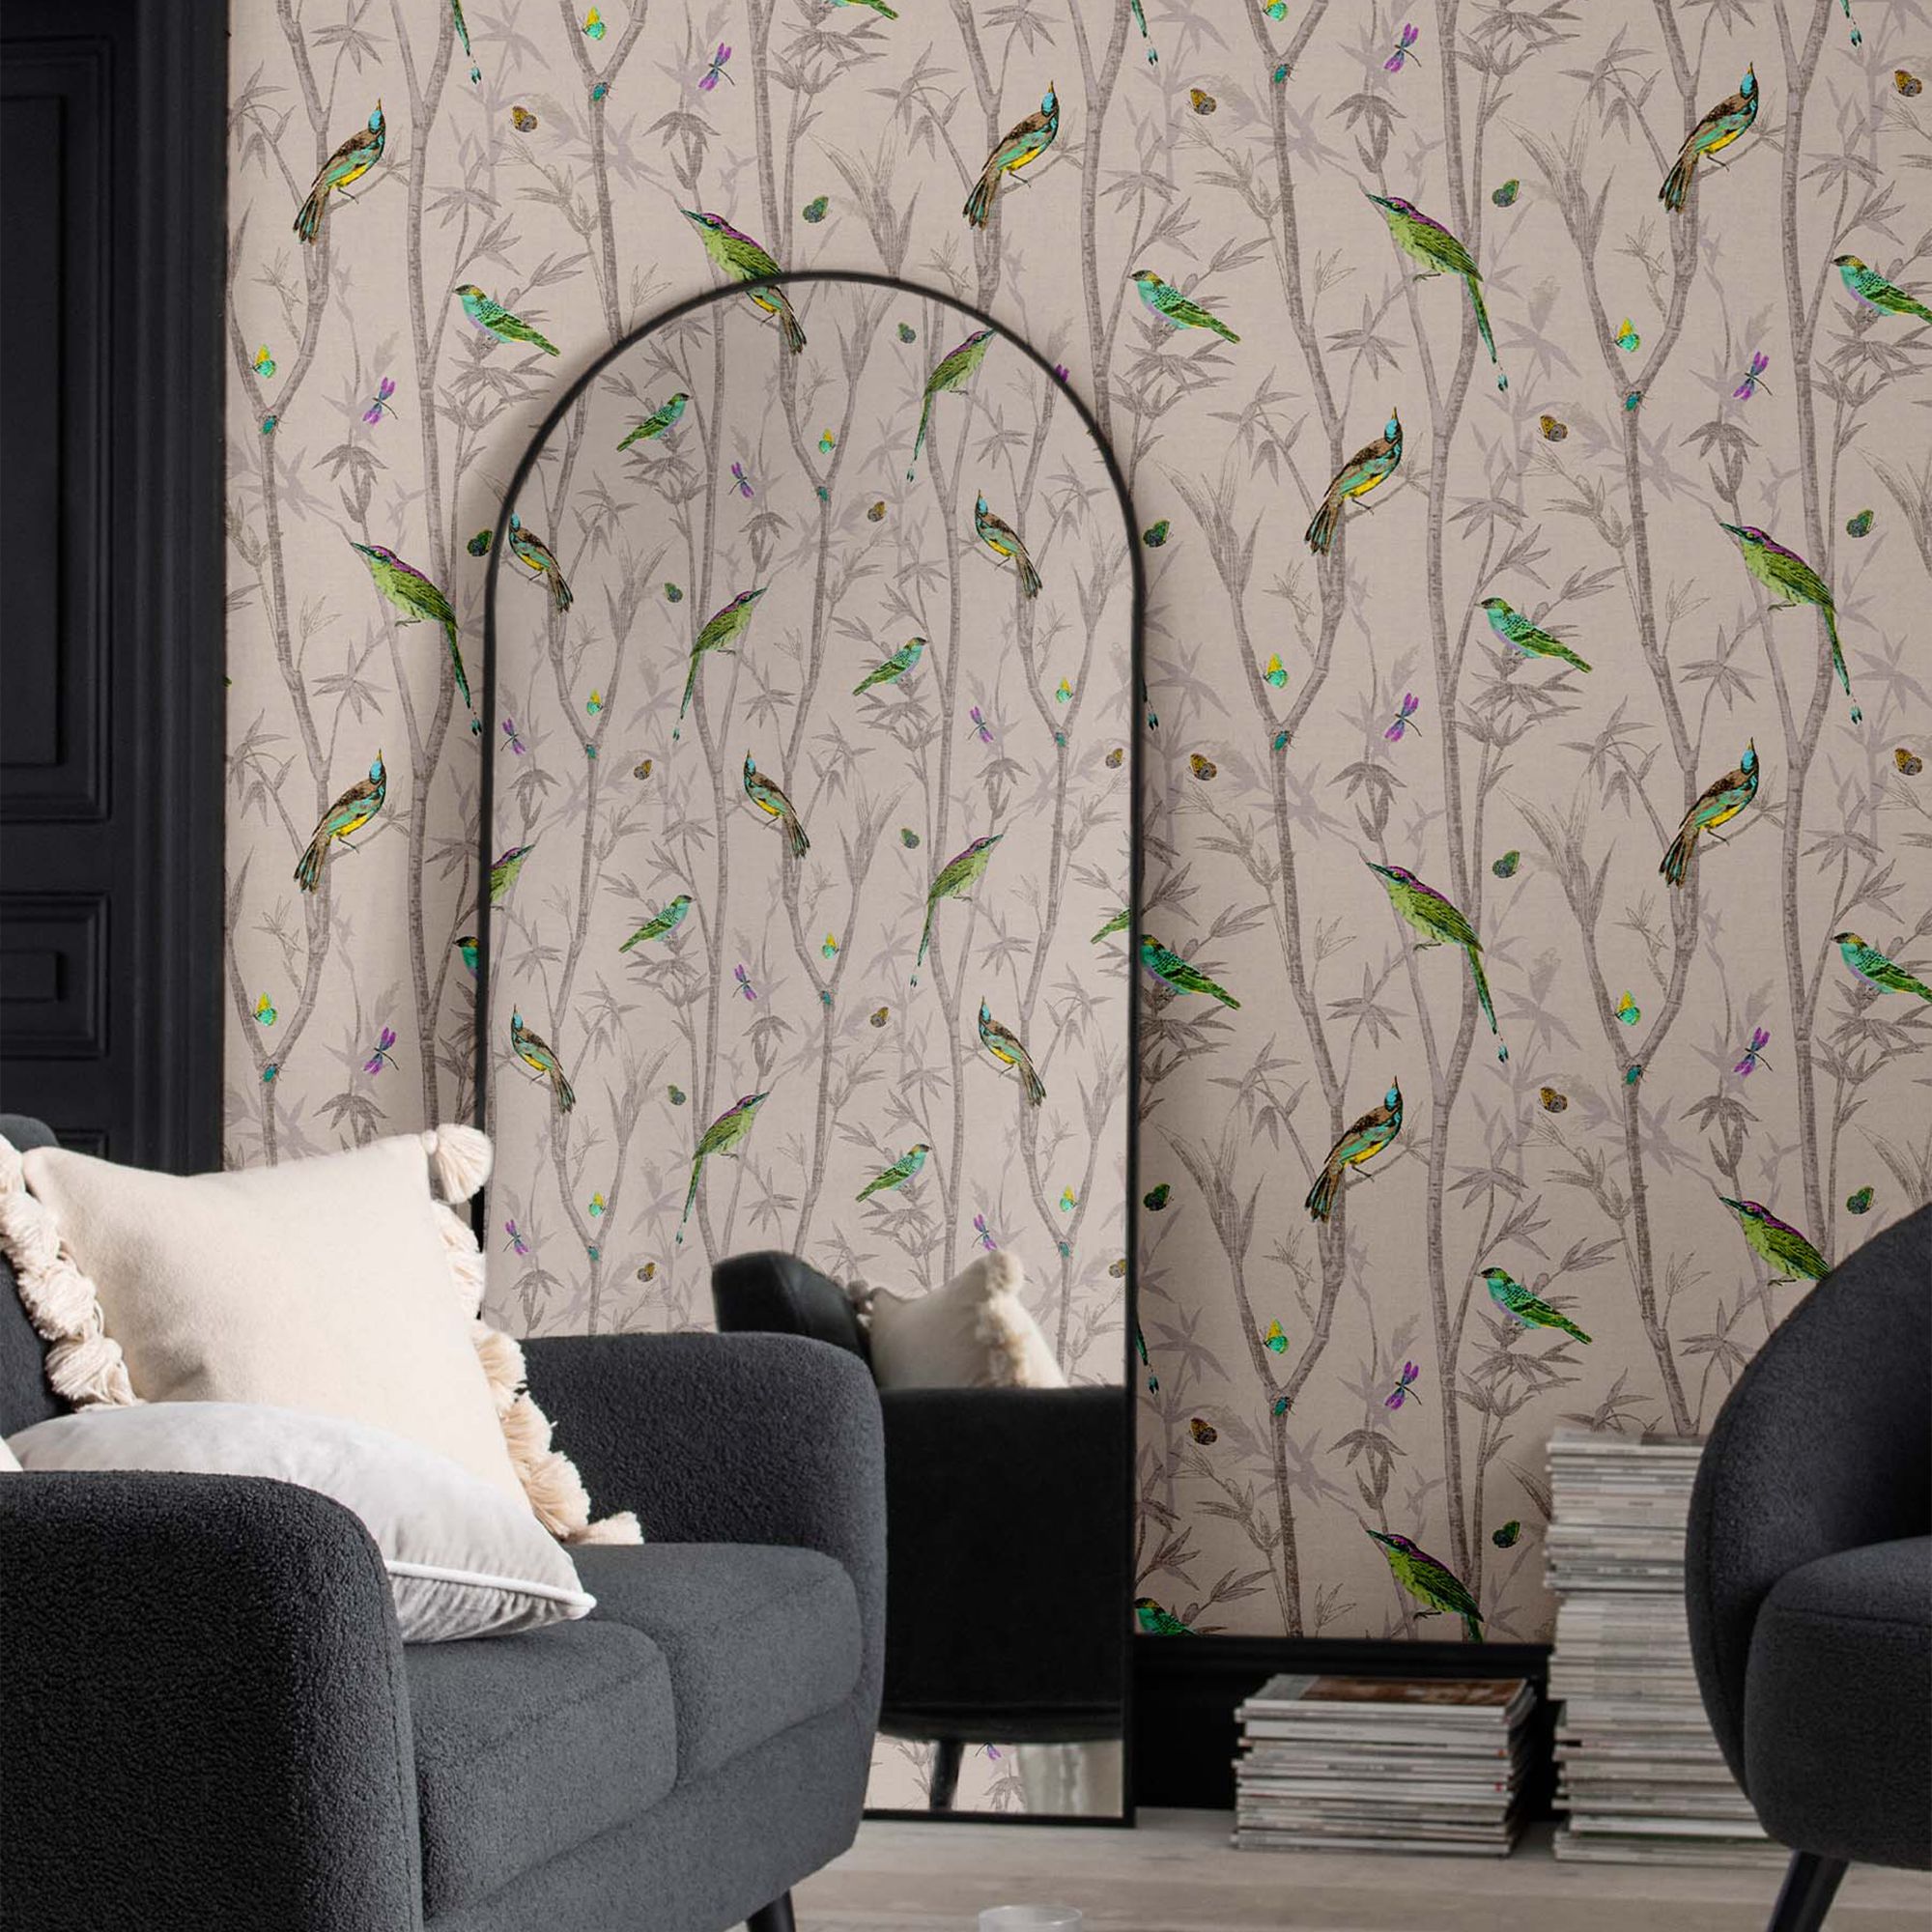 Next Chinoiserie bird trail Natural Smooth Wallpaper